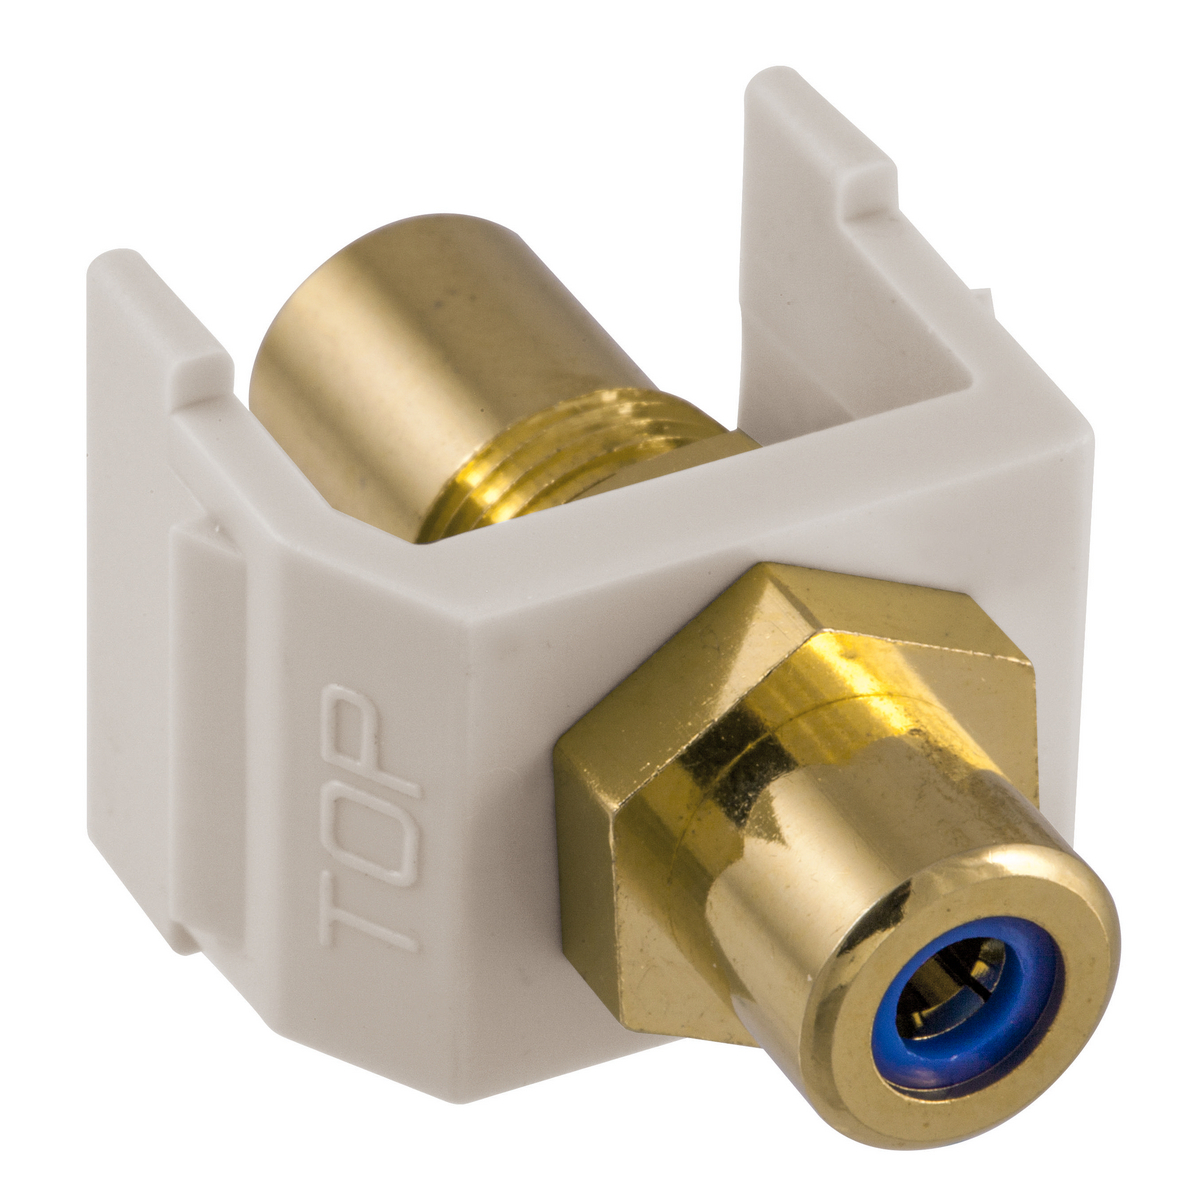 SNAP-FIT, BL RCA/RCA,OW HOUSING